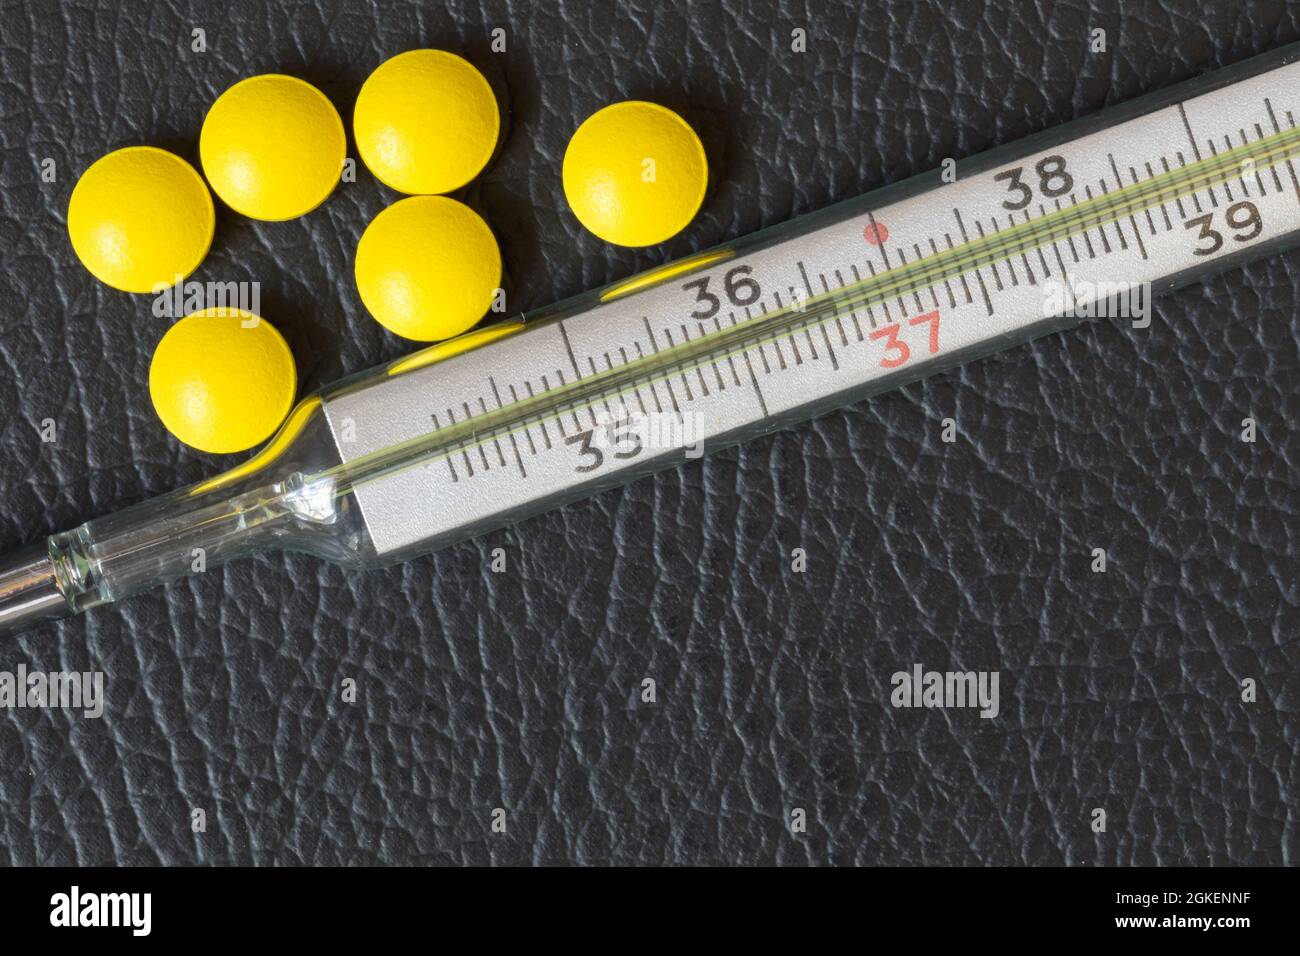 Yellow Analog Thermometer Stock Photo - Download Image Now